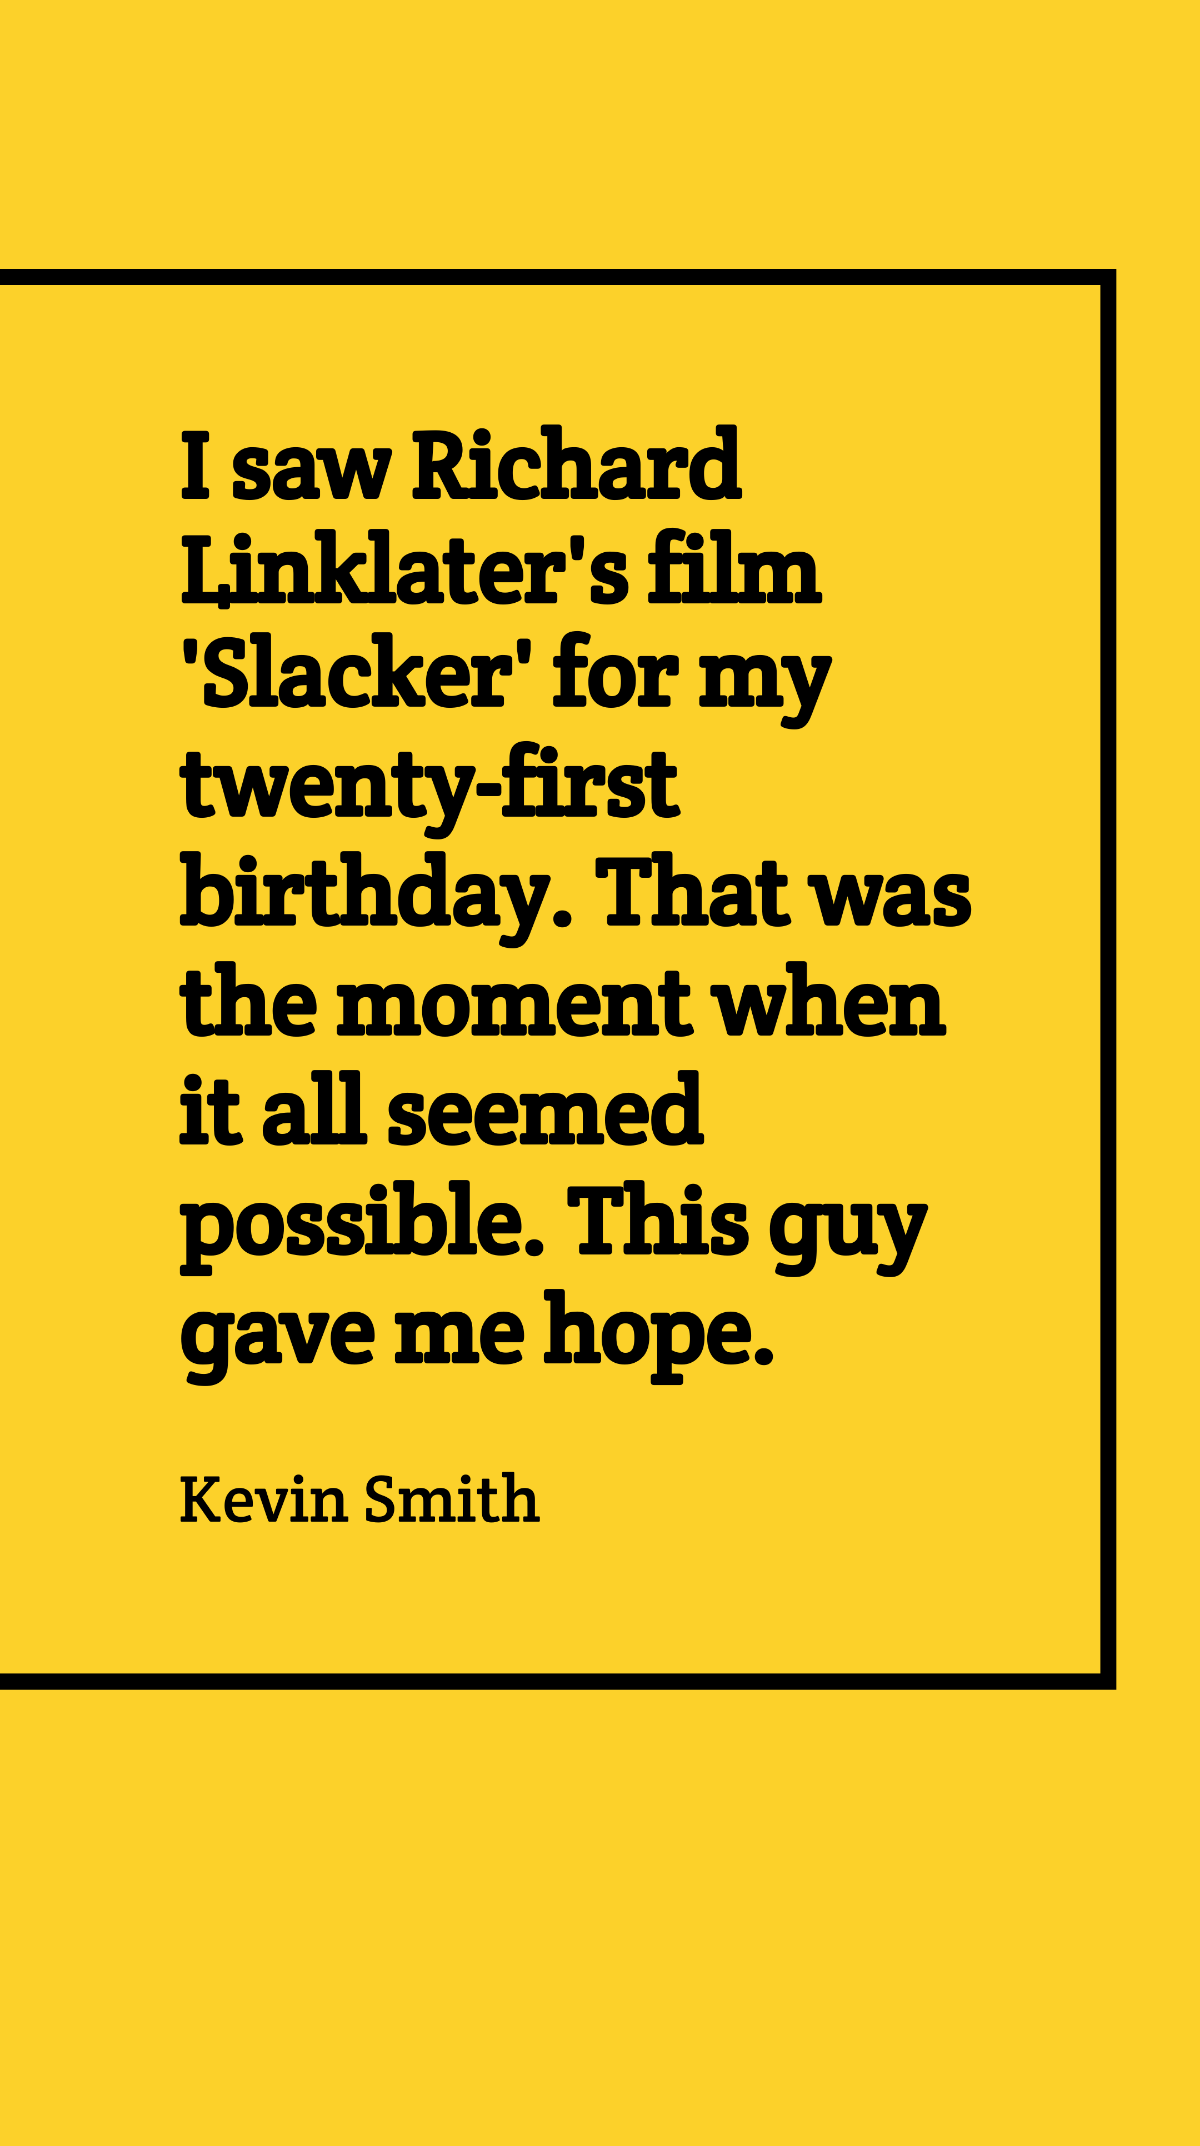 Free Kevin Smith - I saw Richard Linklater's film 'Slacker' for my twenty-first birthday. That was the moment when it all seemed possible. This guy gave me hope. Template